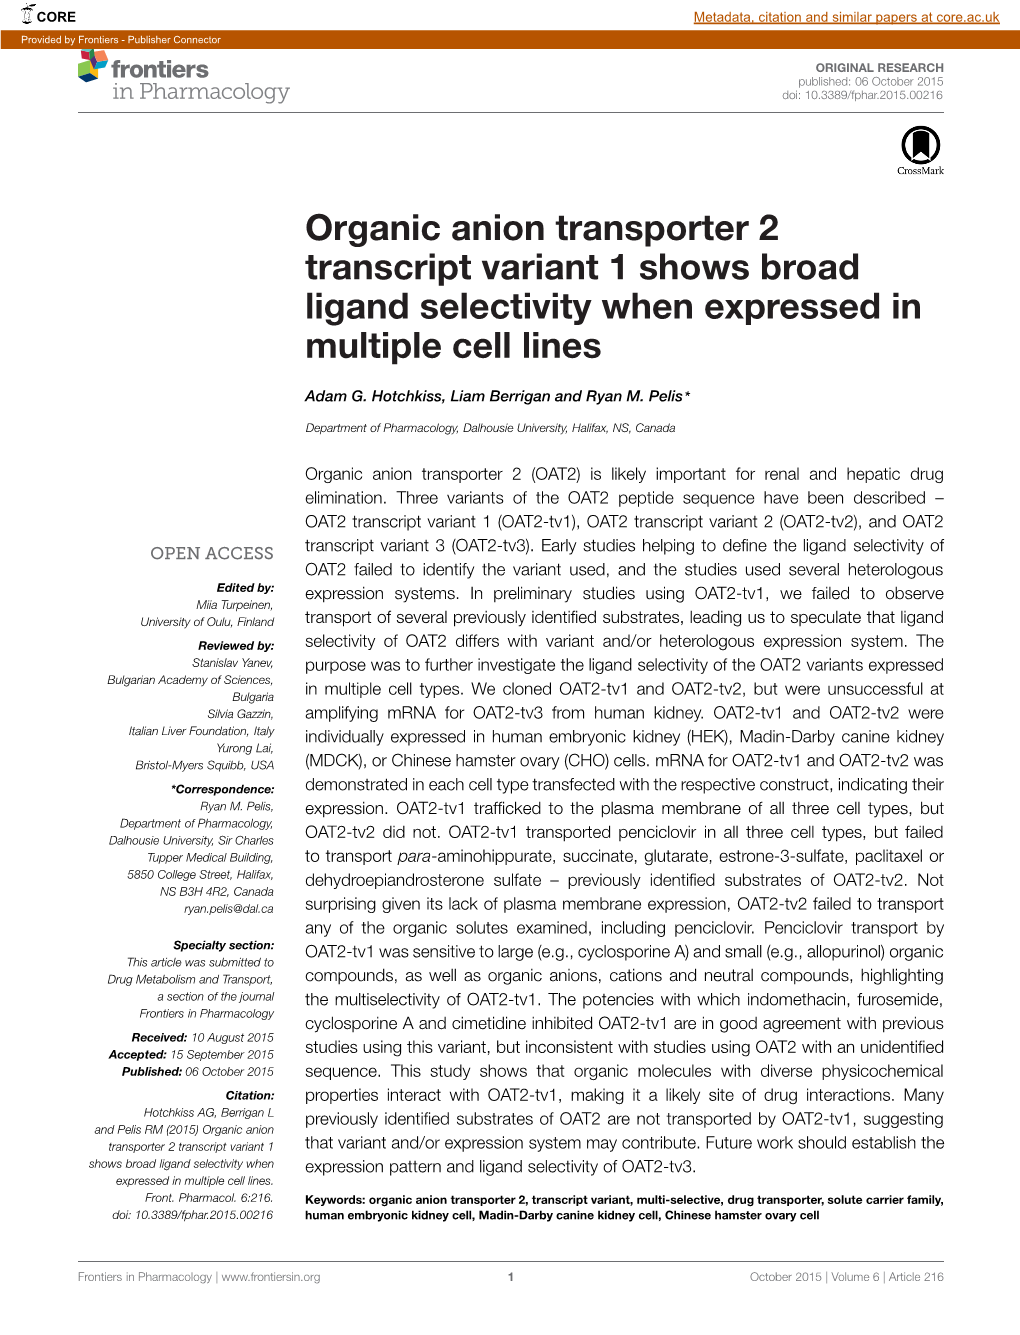 Organic Anion Transporter 2 Transcript Variant 1 Shows Broad Ligand Selectivity When Expressed in Multiple Cell Lines